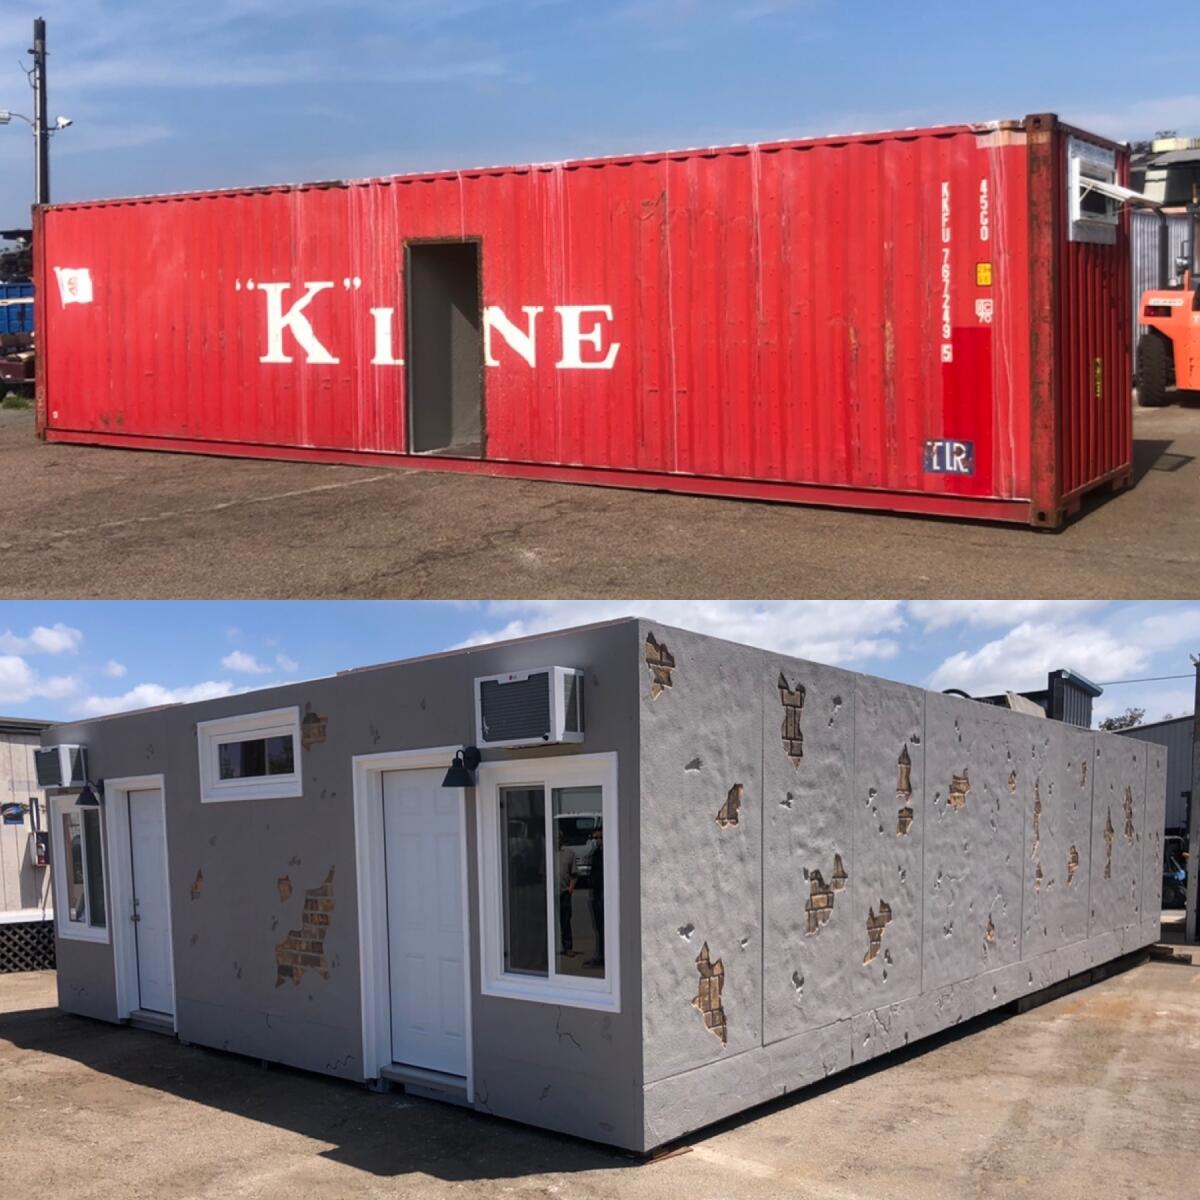 Before-and-after photos of a shipping container fully converted into a portable home.